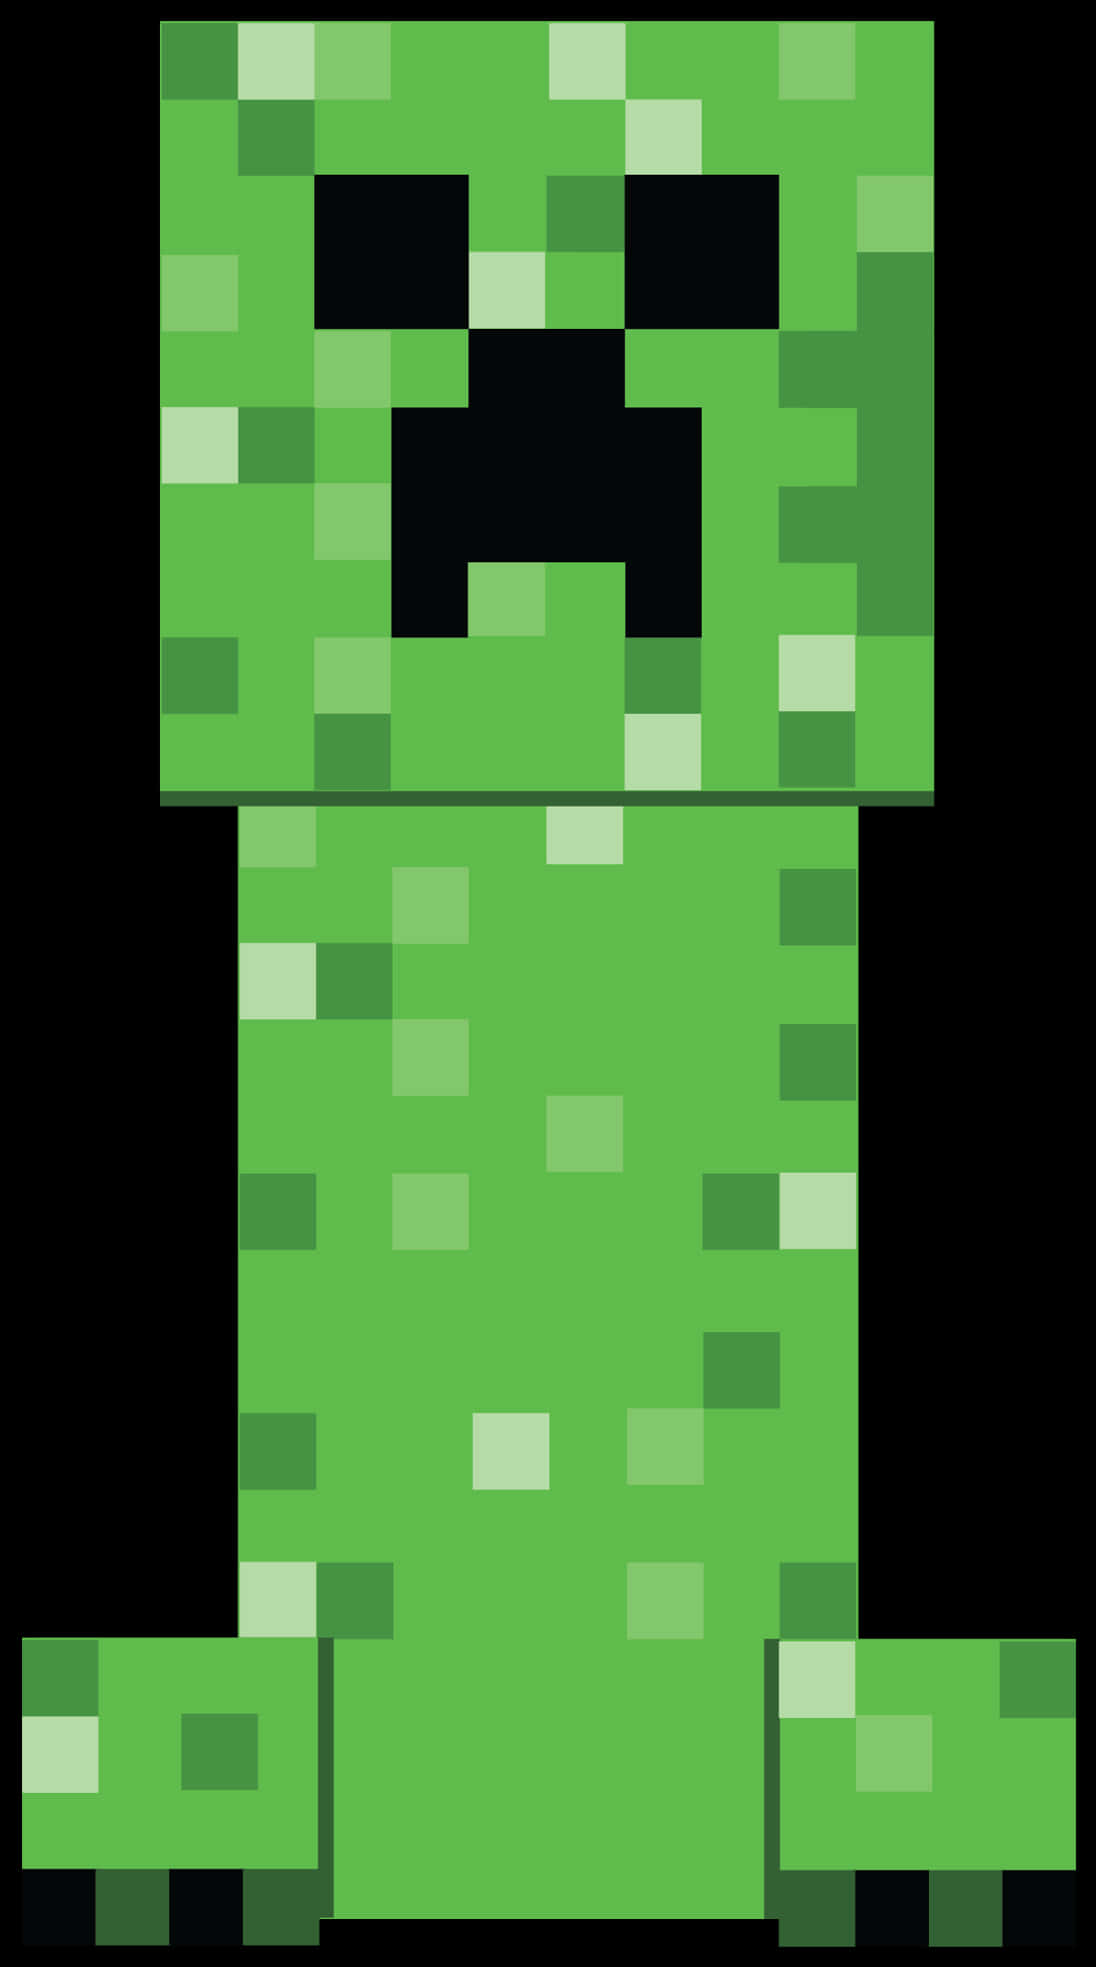 A Green Pixelated Character